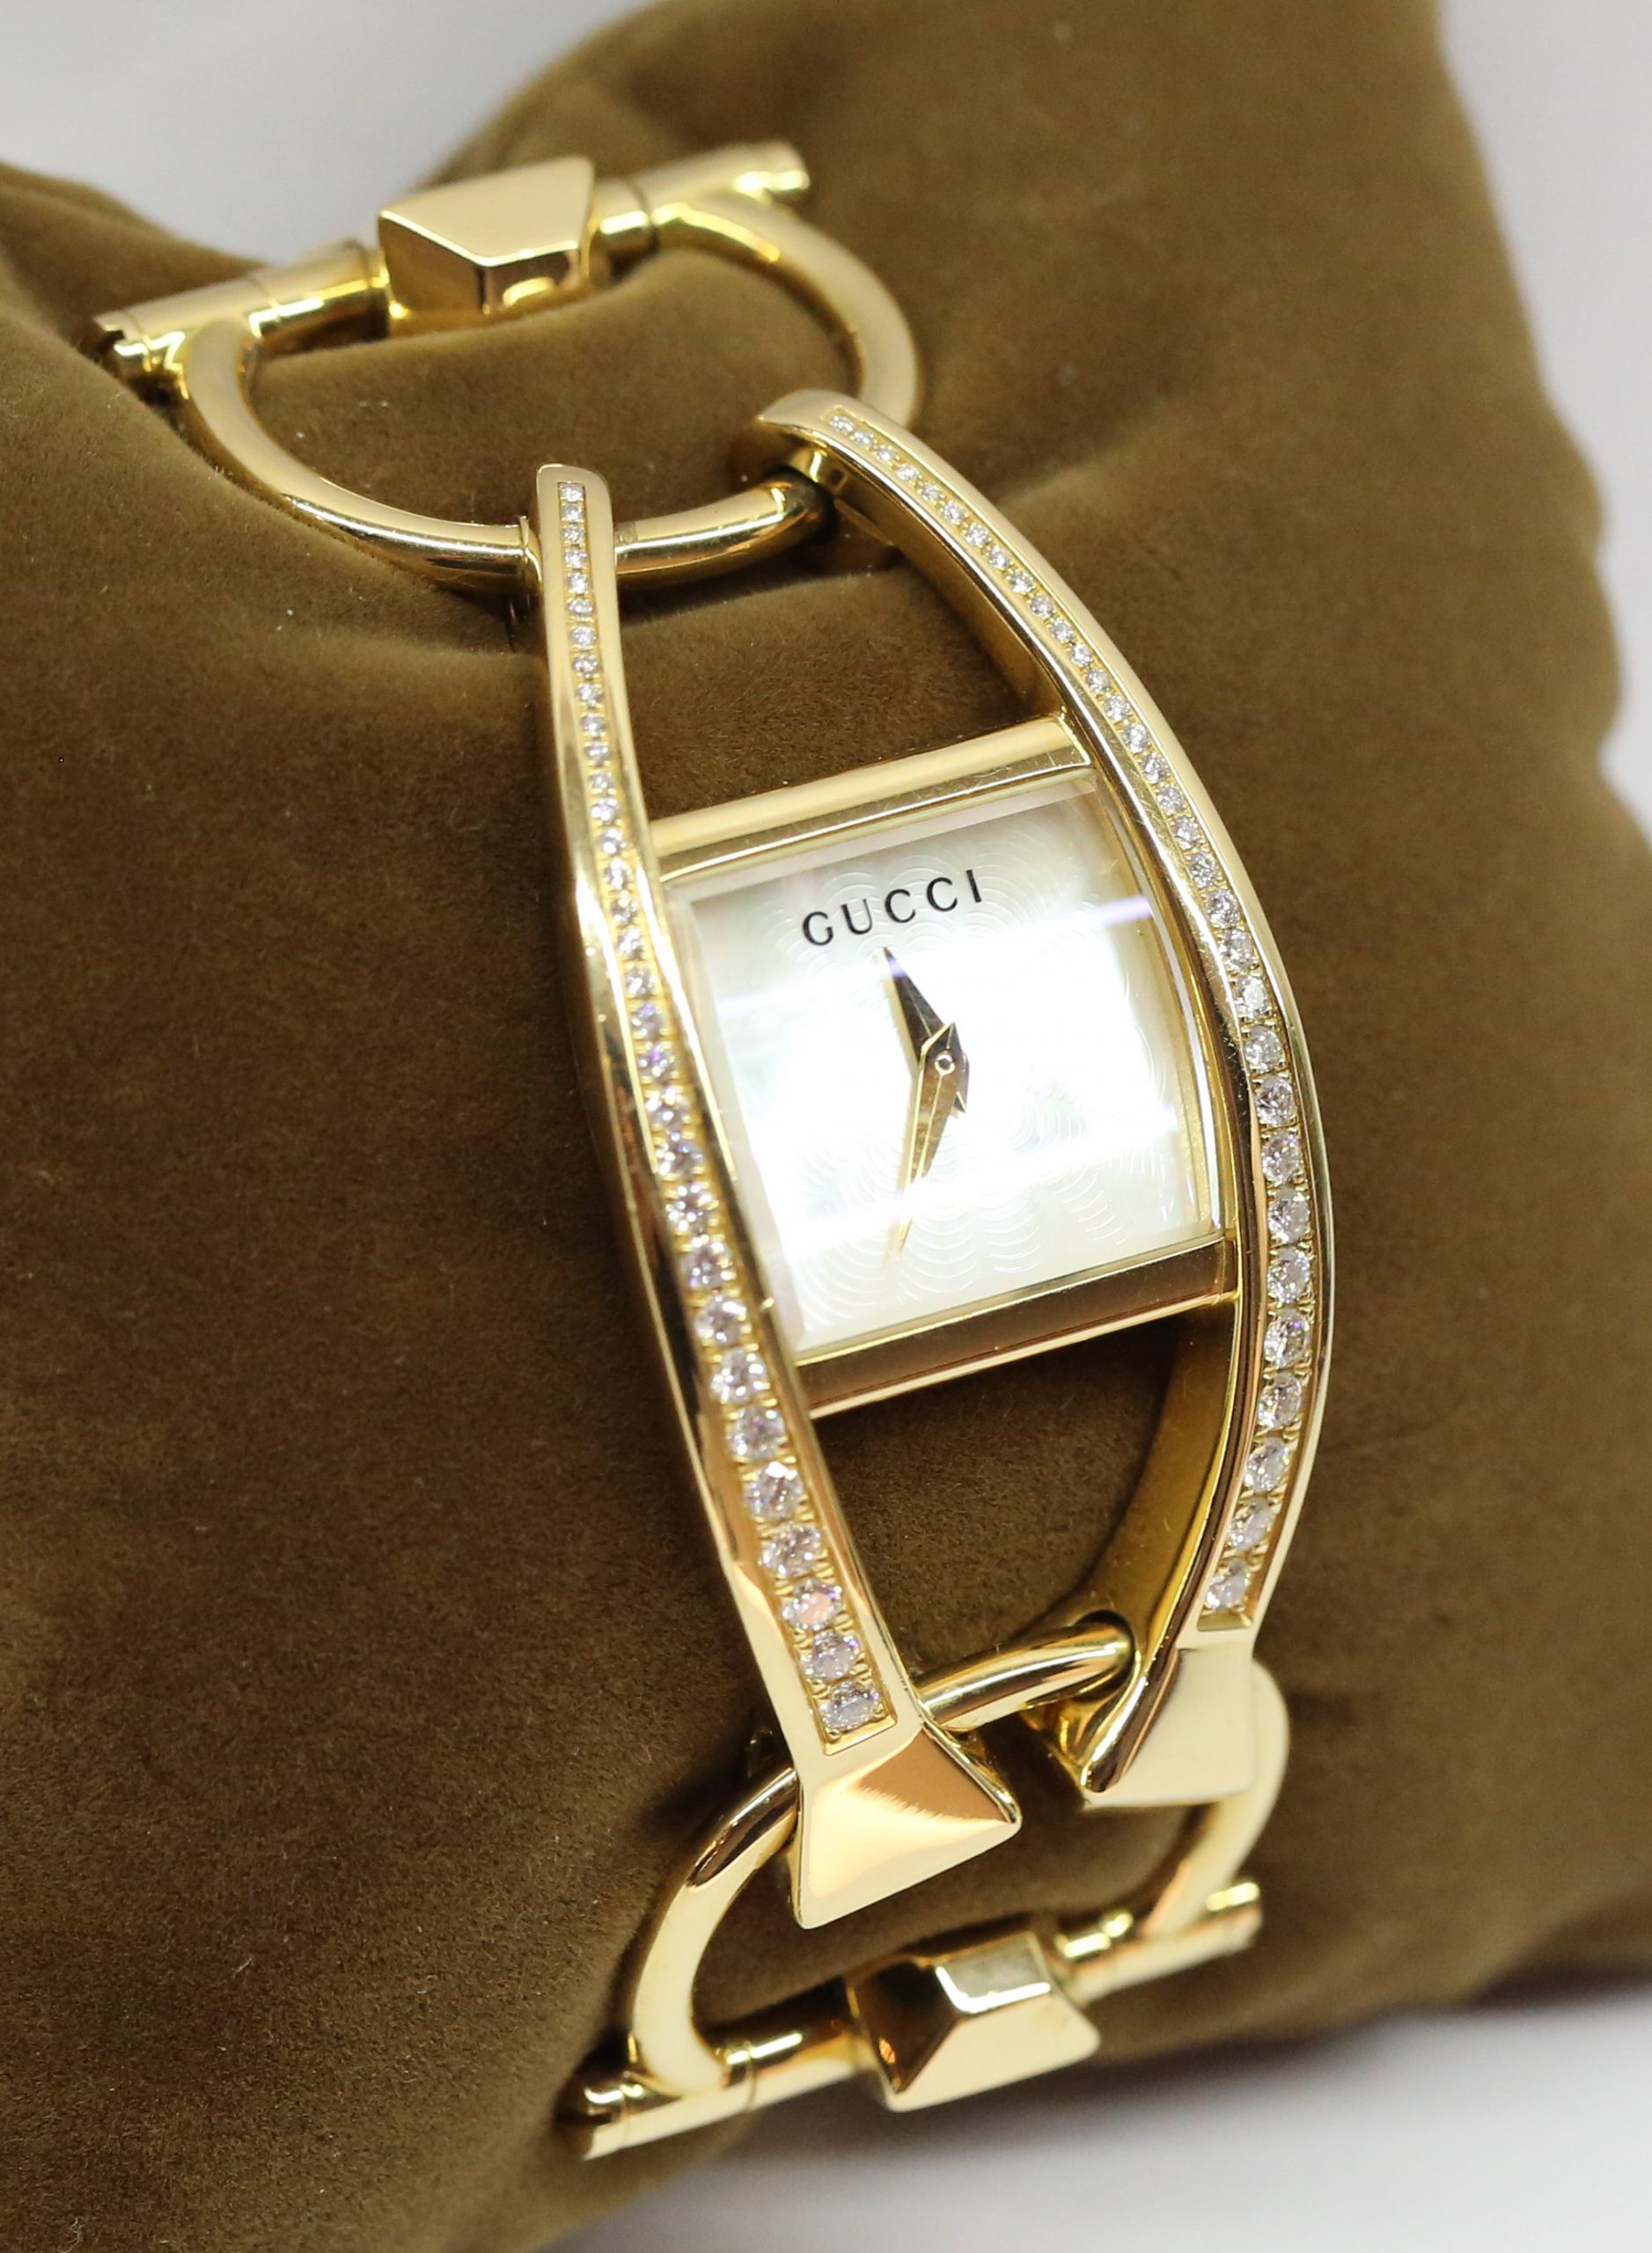 Gucci Chido 18ct Yellow Gold Bracelet Watch With 64 Round brilliant cut ...